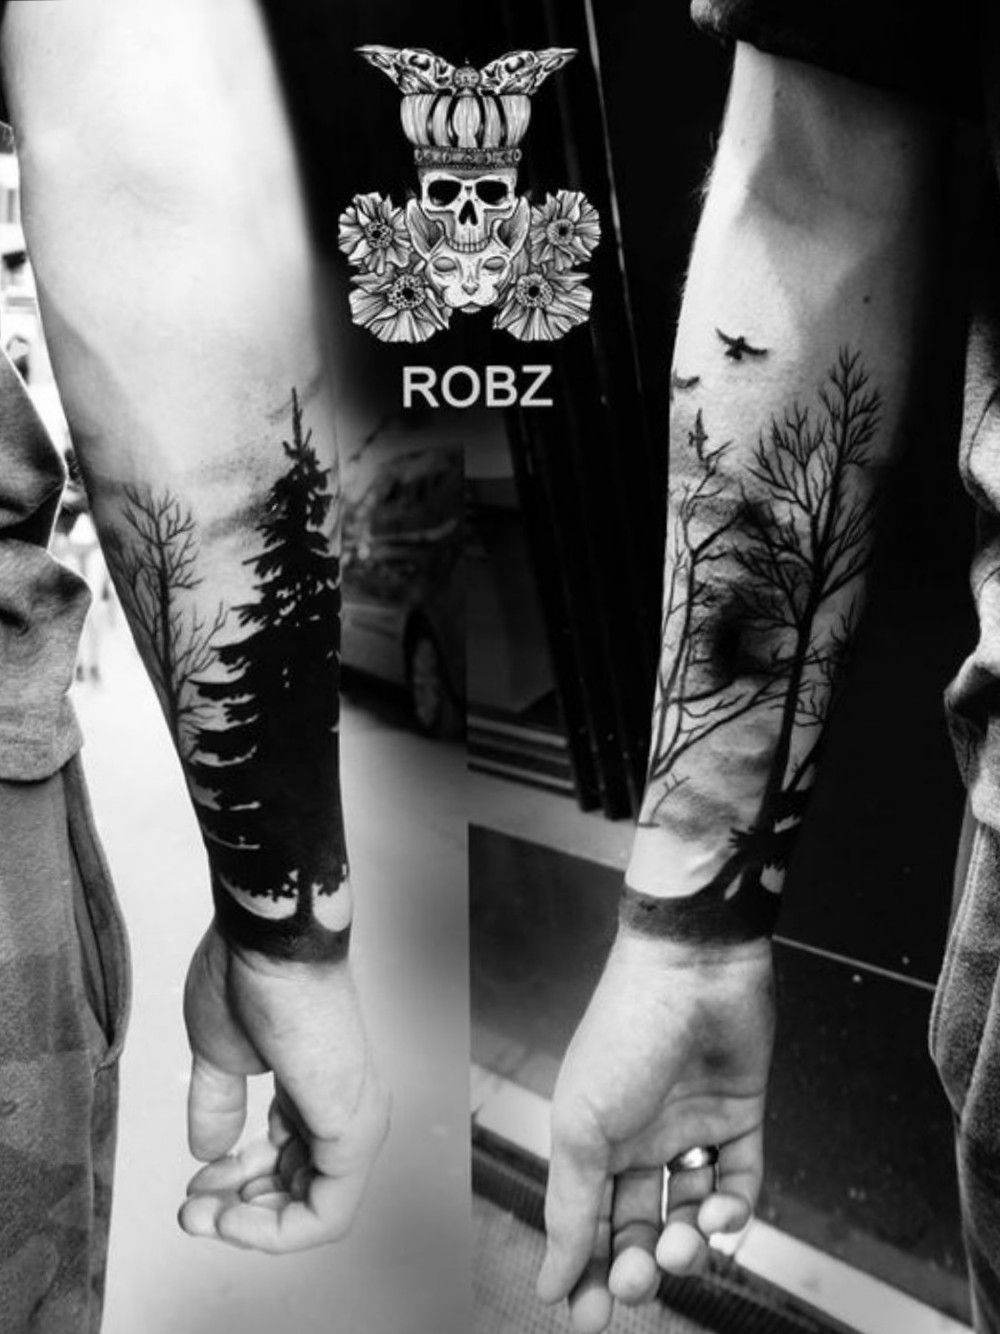 40 Awesome Forest Tattoo Design Ideas